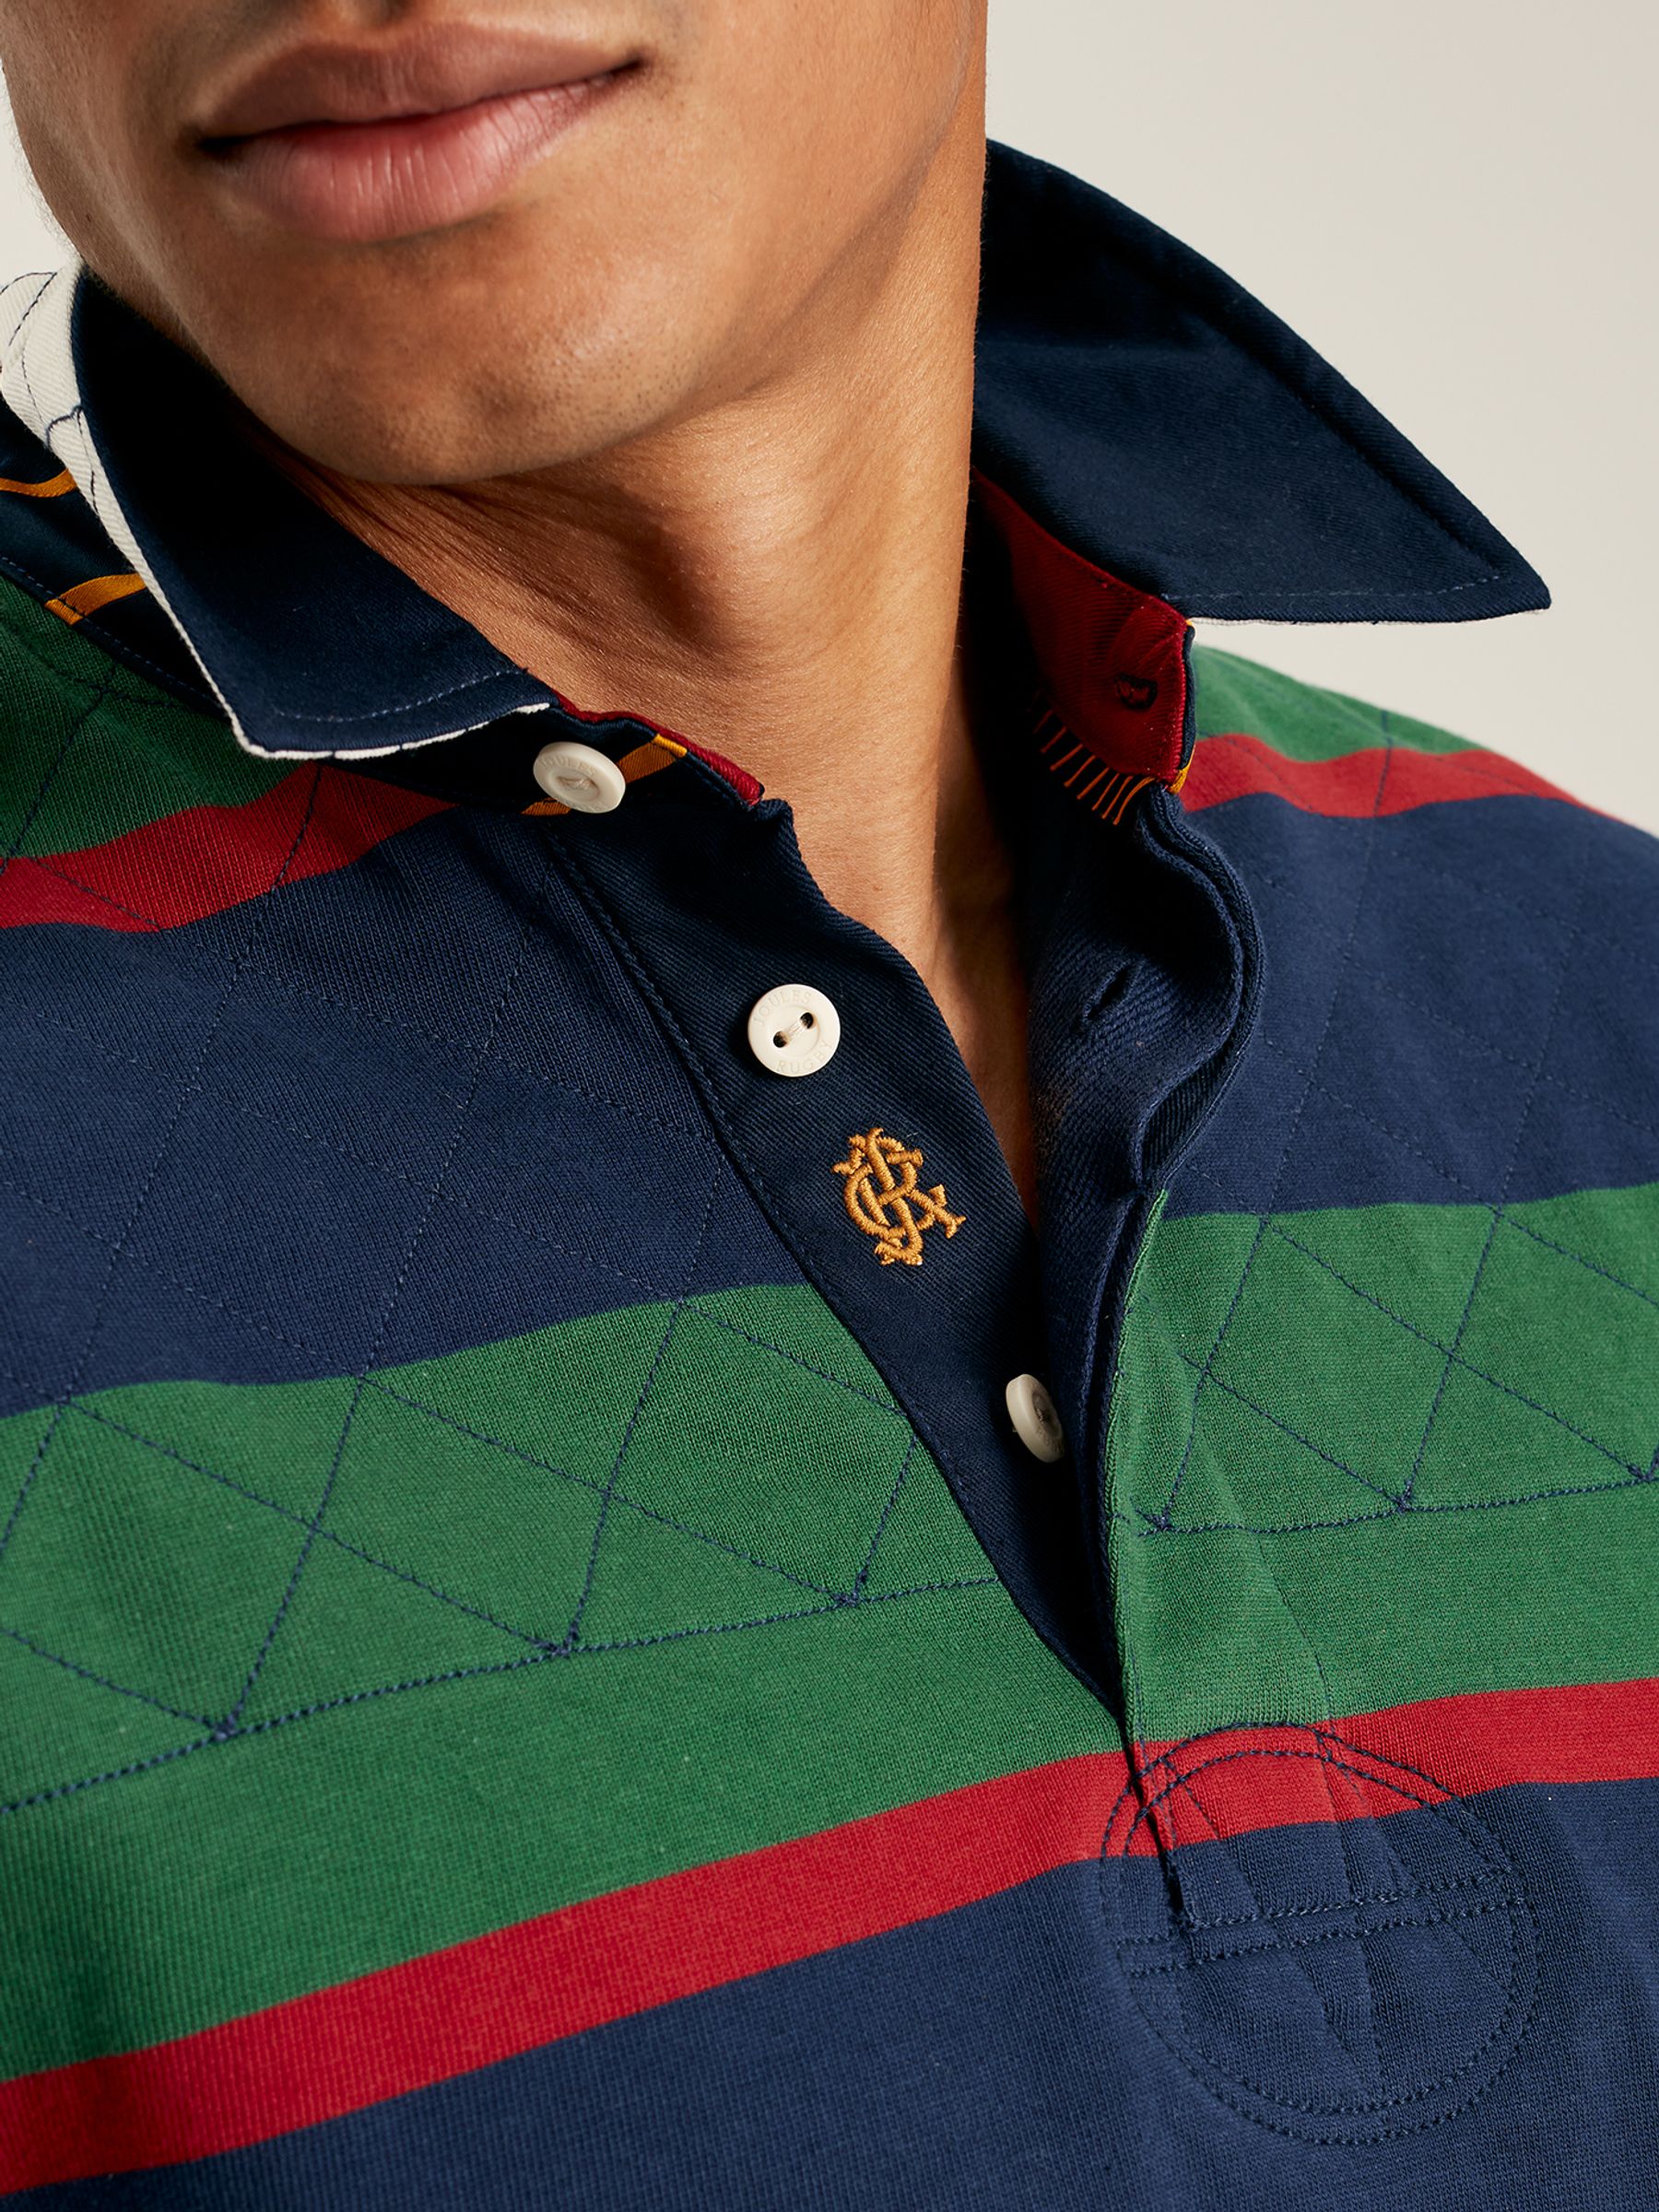 Buy Joules Embellished Rugby Shirt from the Joules online shop